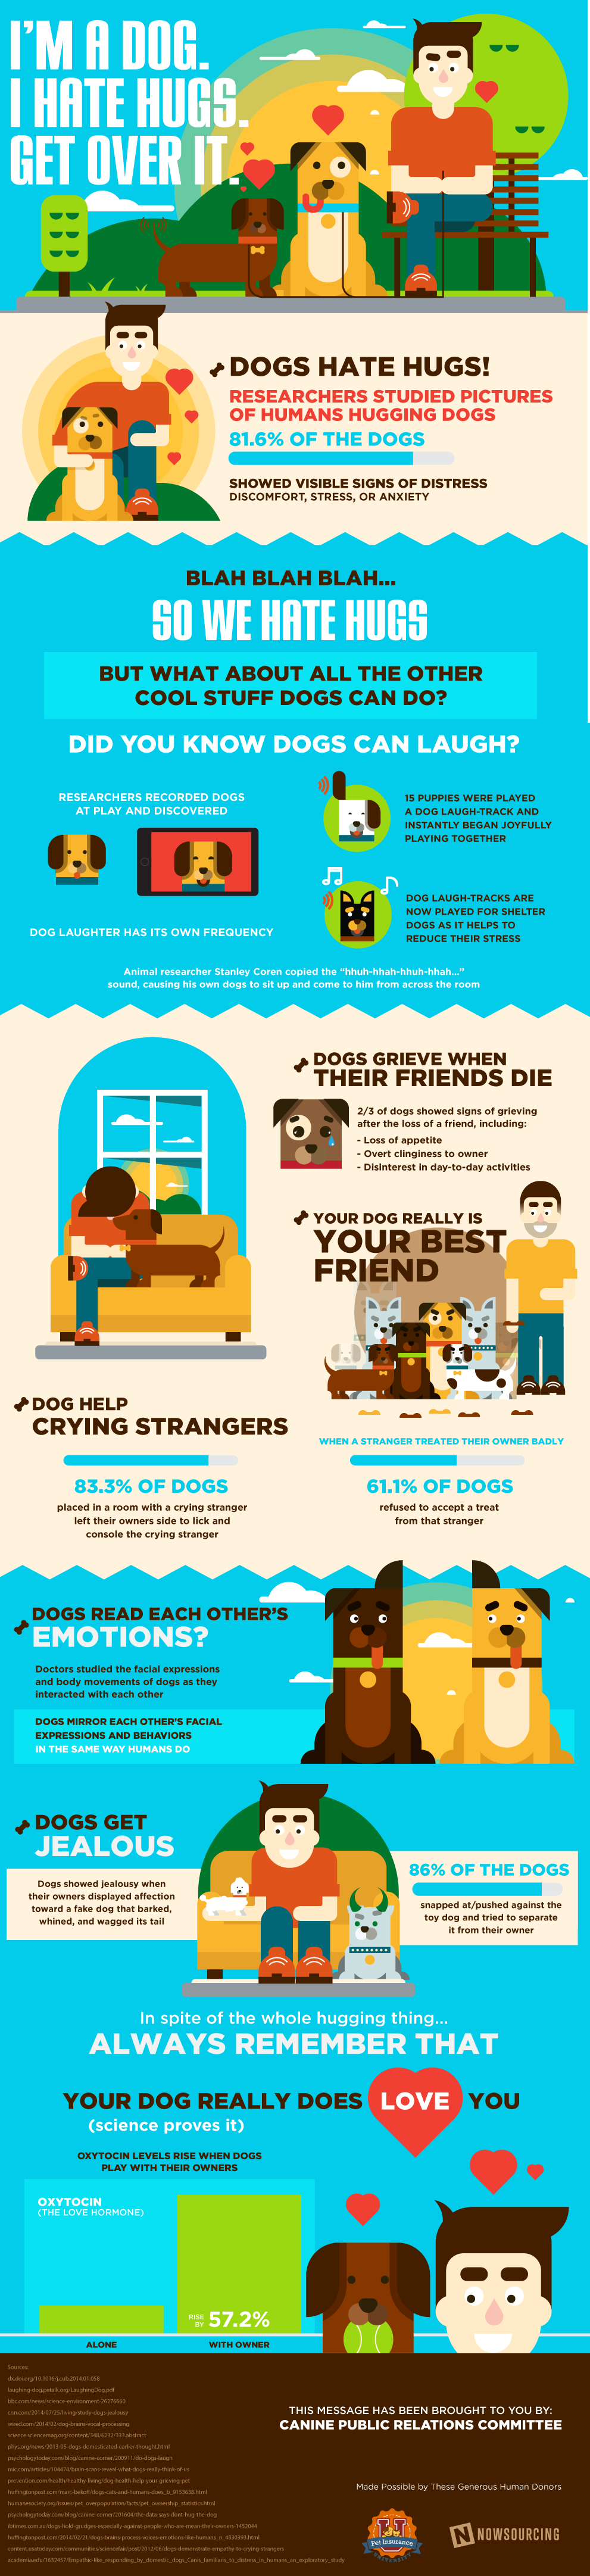 Seven Reasons Dogs Are Better Than Cats